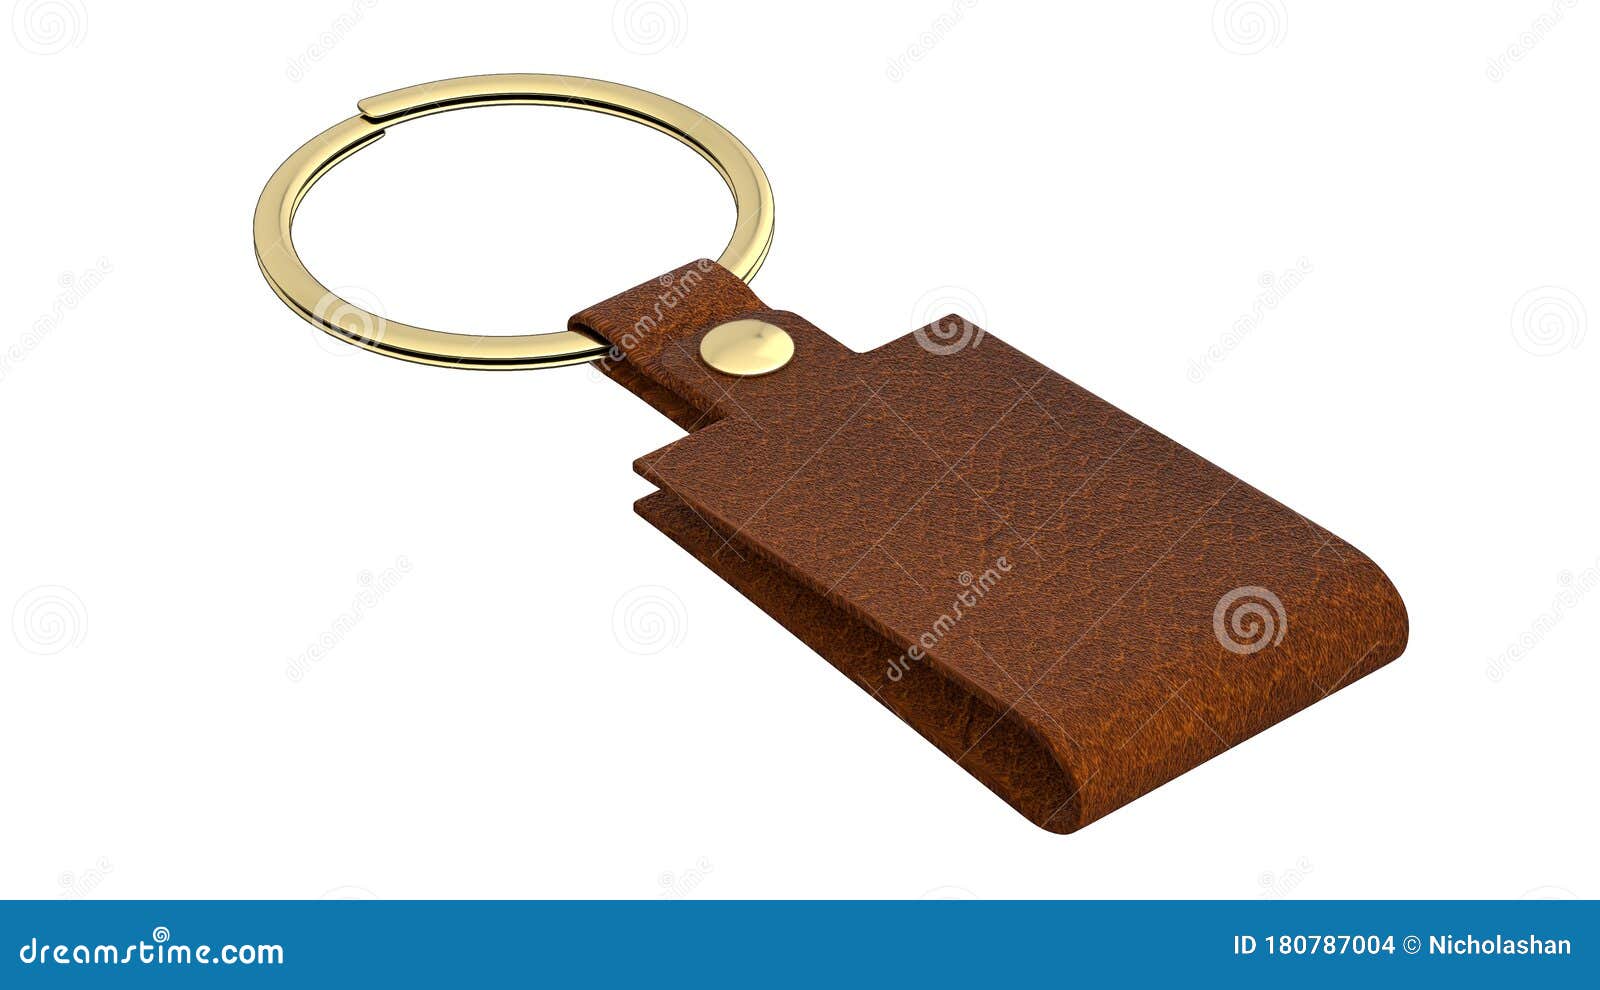 3d rendering of house key in an old leather keychain brown color